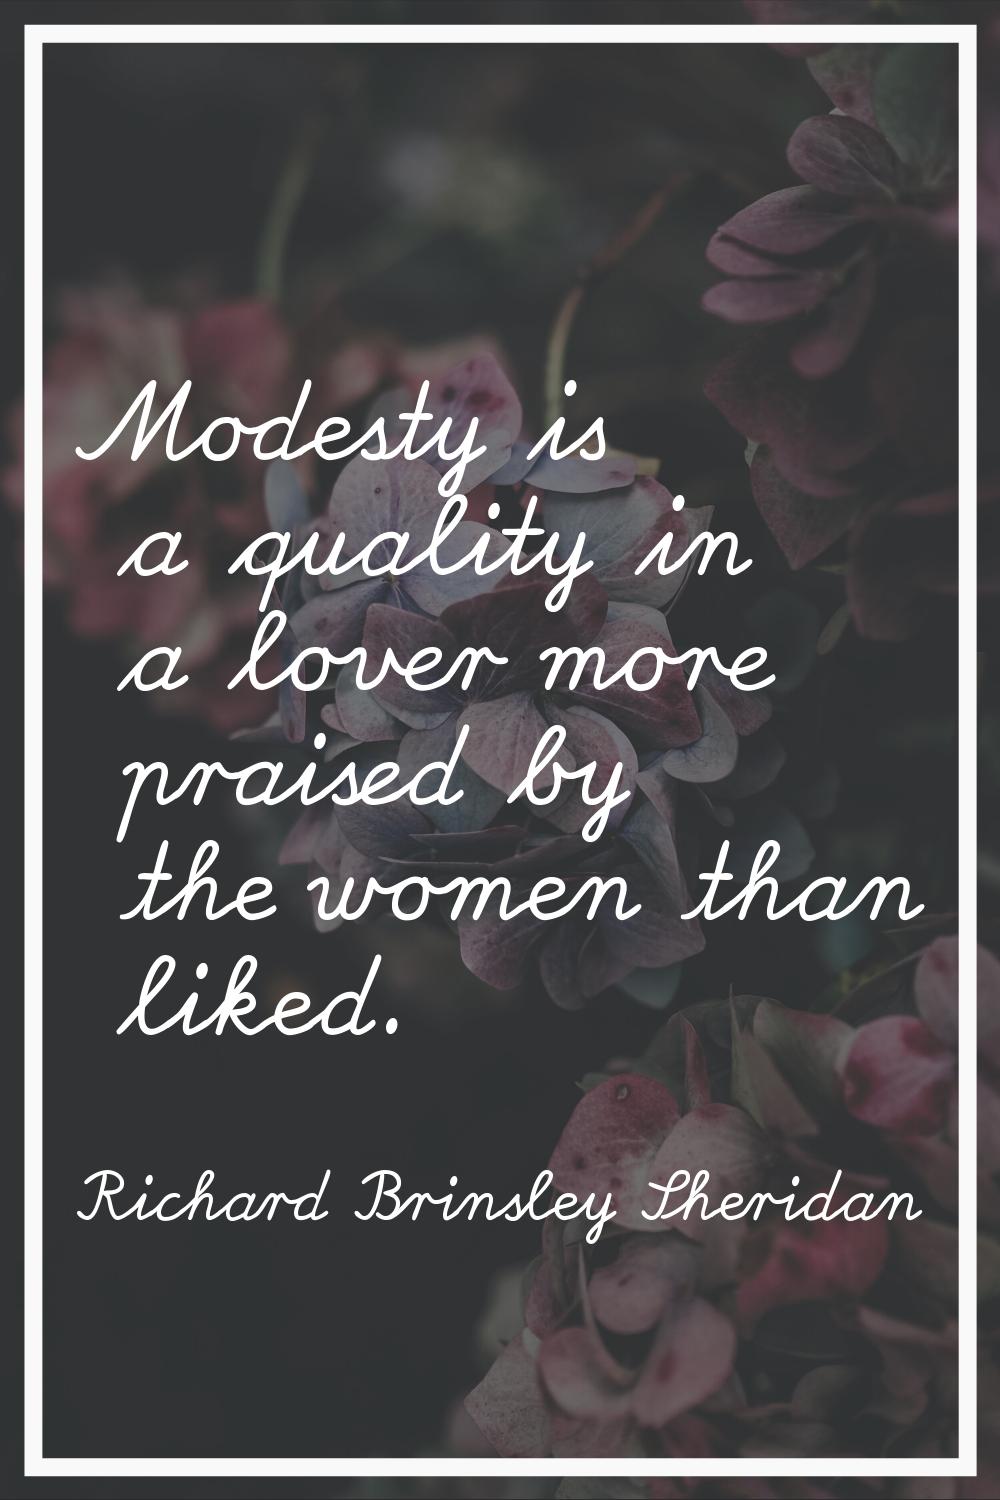 Modesty is a quality in a lover more praised by the women than liked.